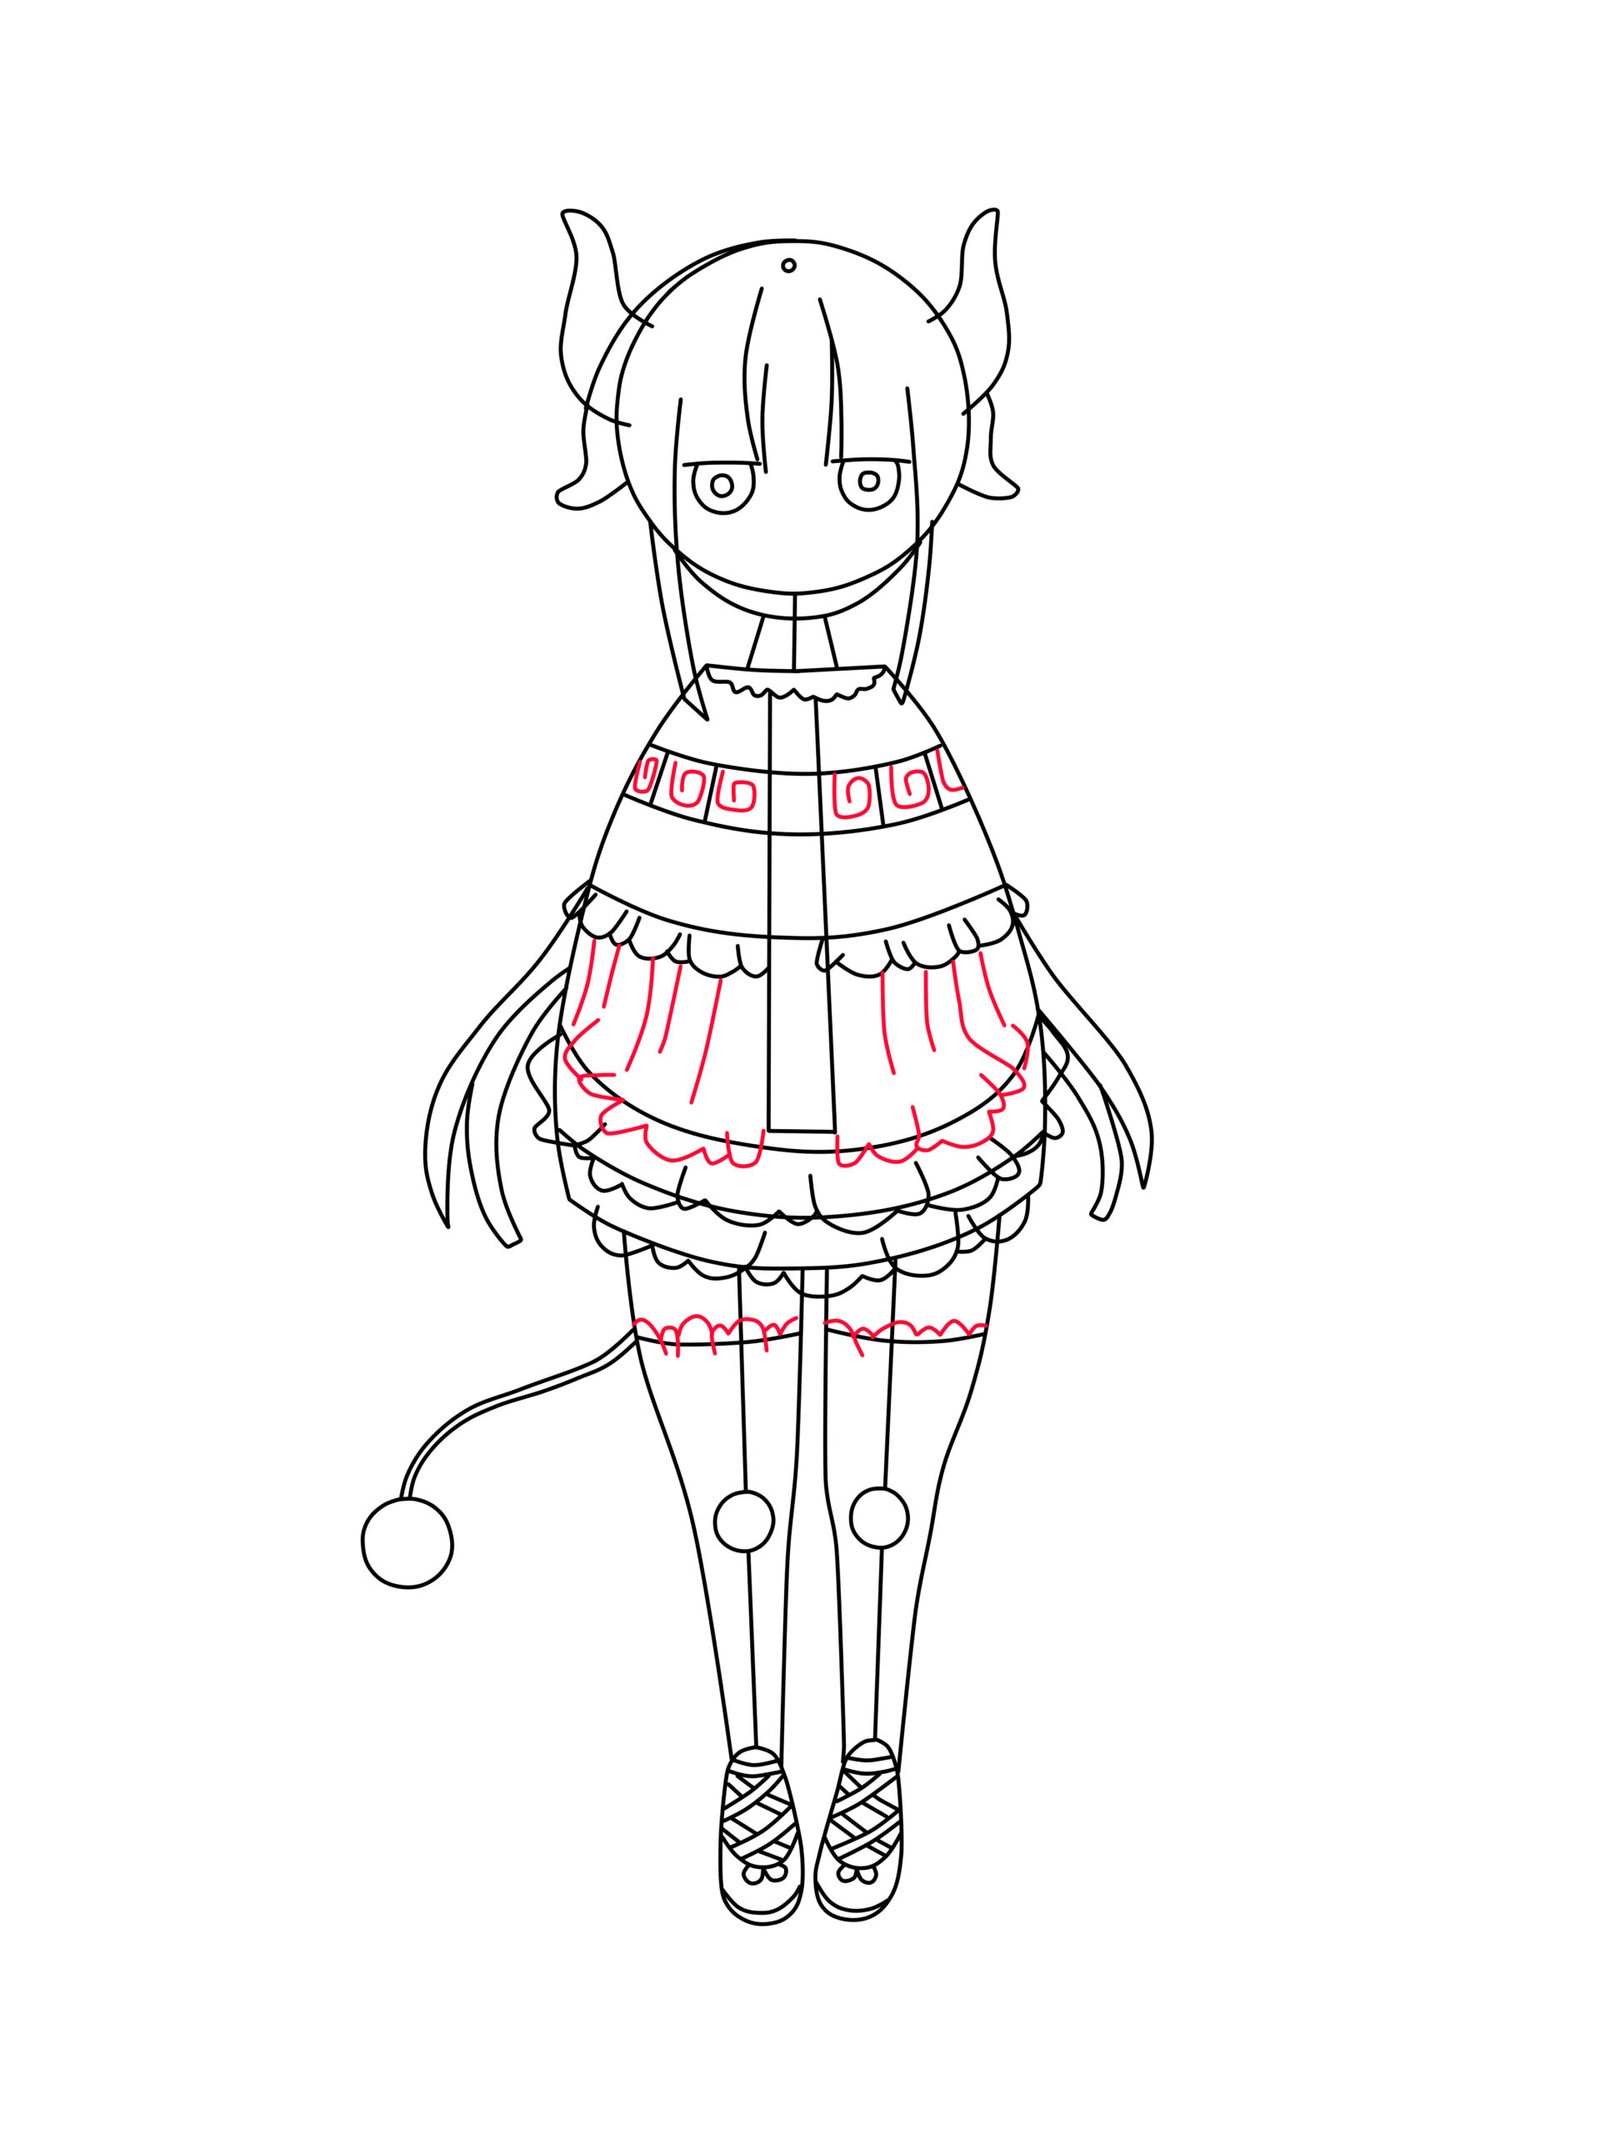 Add Details to Her Dress and Socks